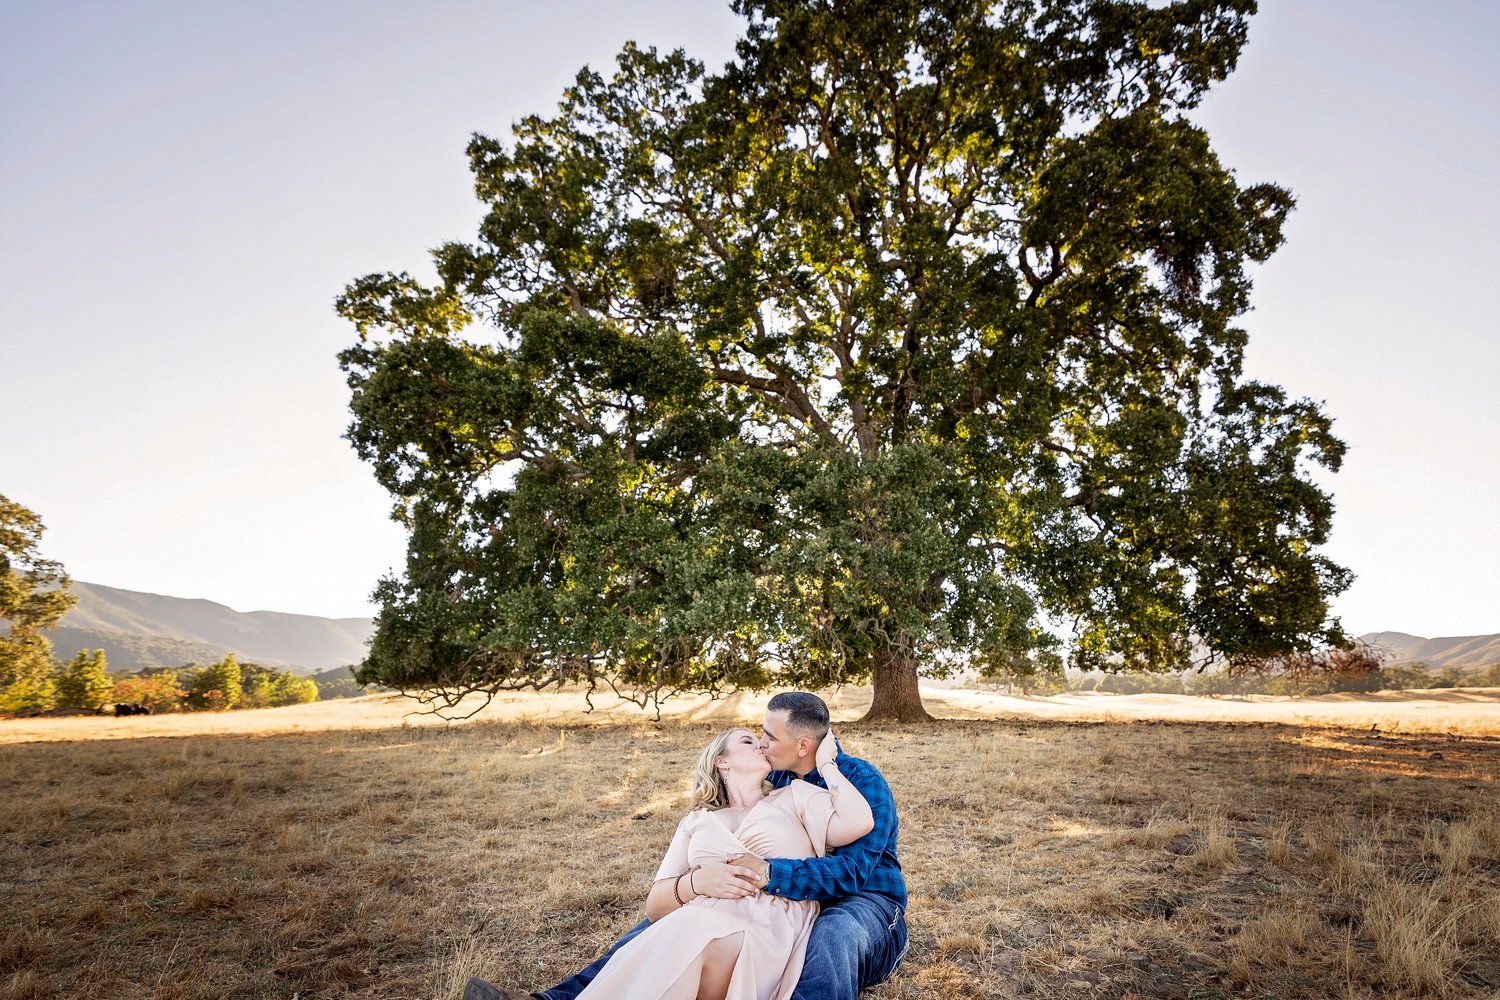 couple sitting on the ground and kissing in front of an oak tree in a field